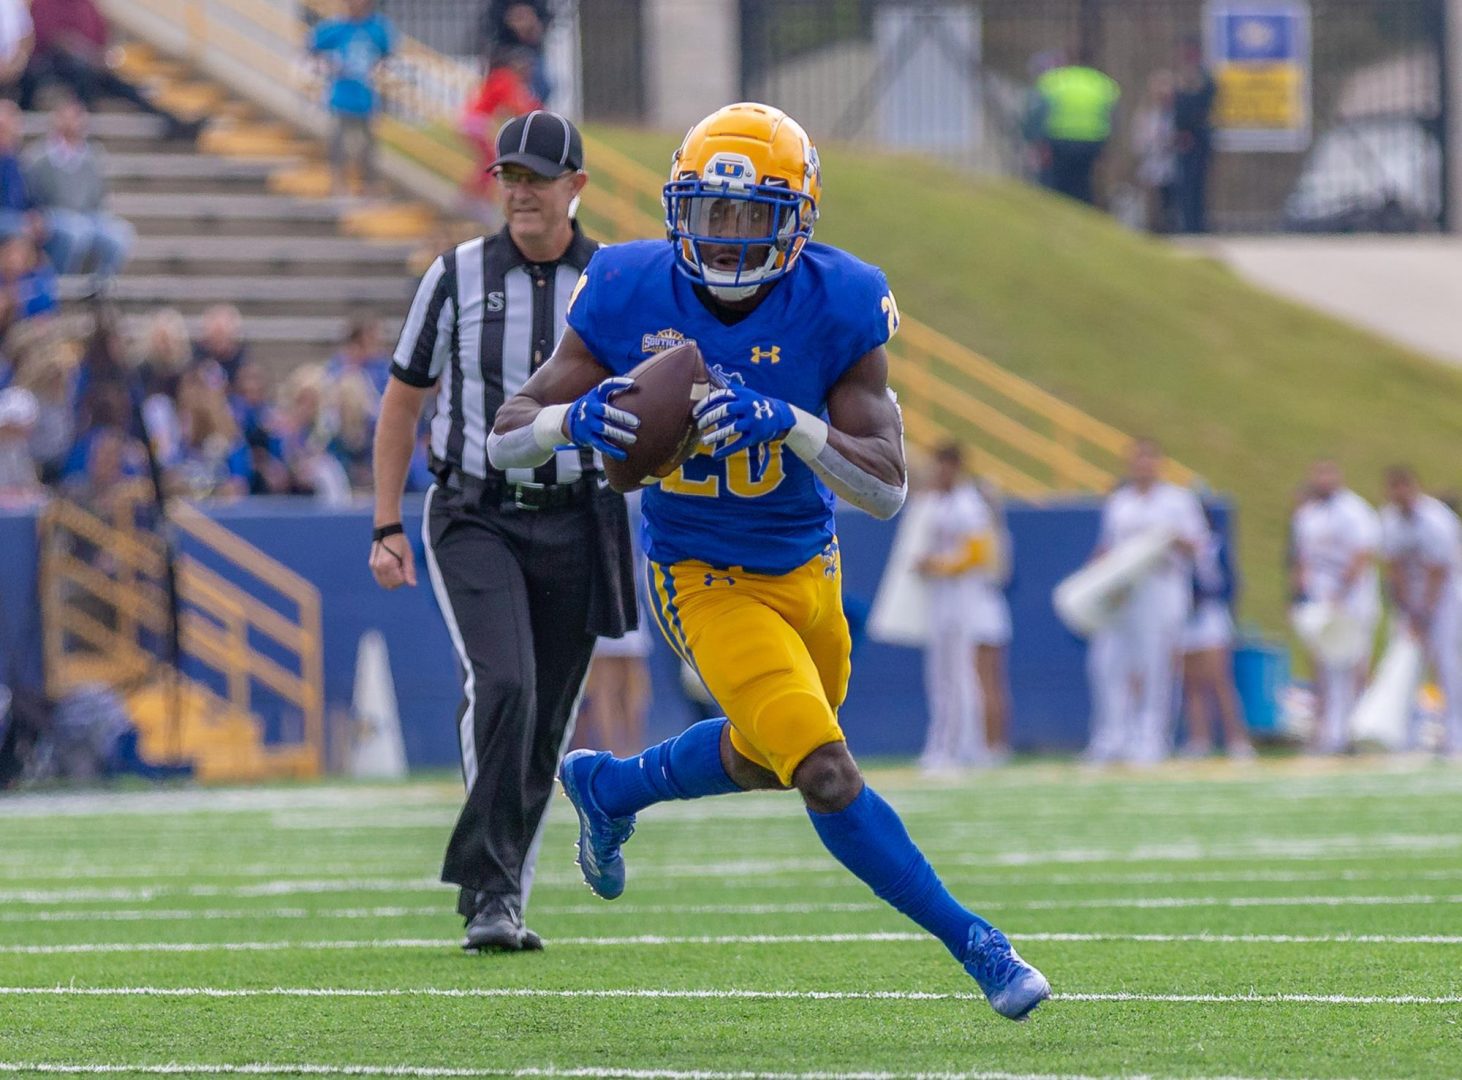 McNeese running back Denota McMahon was named 2022 Southland Conference Offensive Player of the Year - photo courtesy of McNeese Athletics